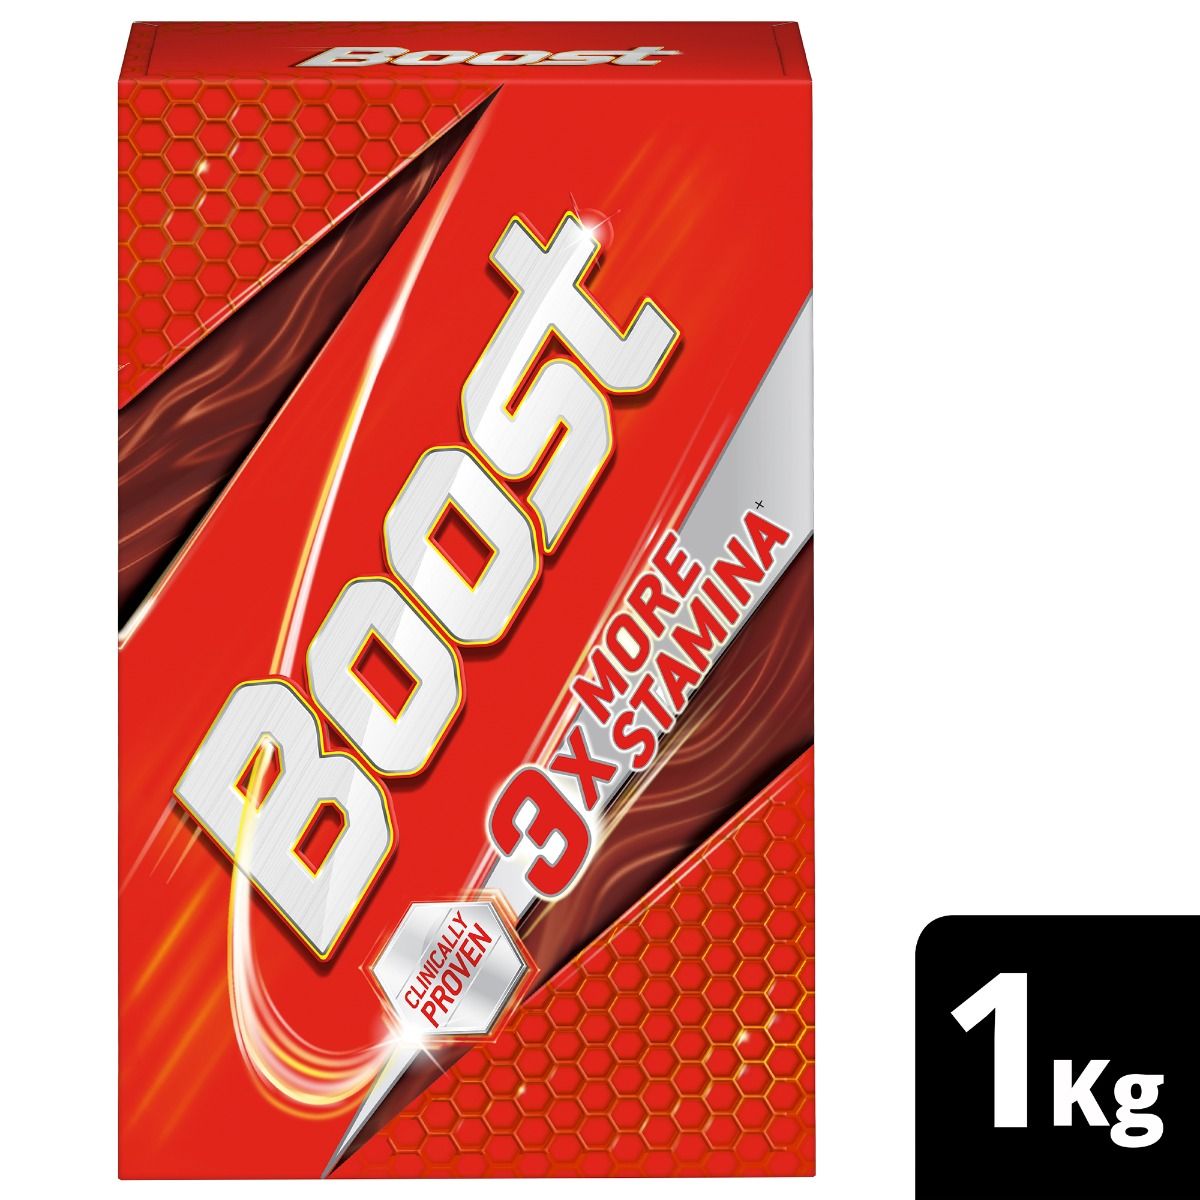 Boost Health & Nutrition Drink, 1 kg Refill Pack, Pack of 1 